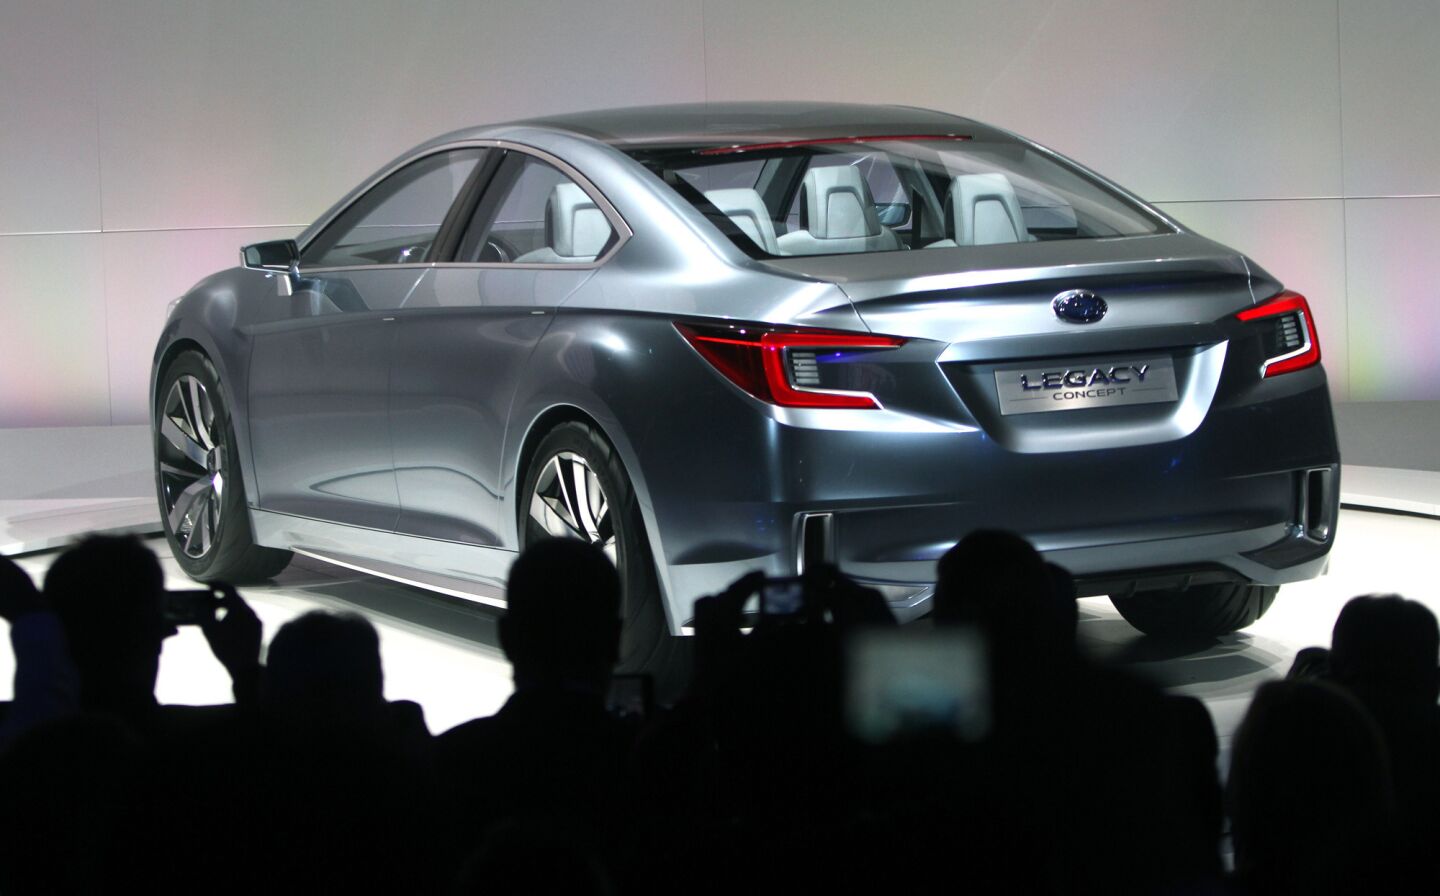 The Subaru Legacy was second among cars, with 1.5% having more than 200,000 miles on the odometer, according to iSeeCars.com, a used-car information site.